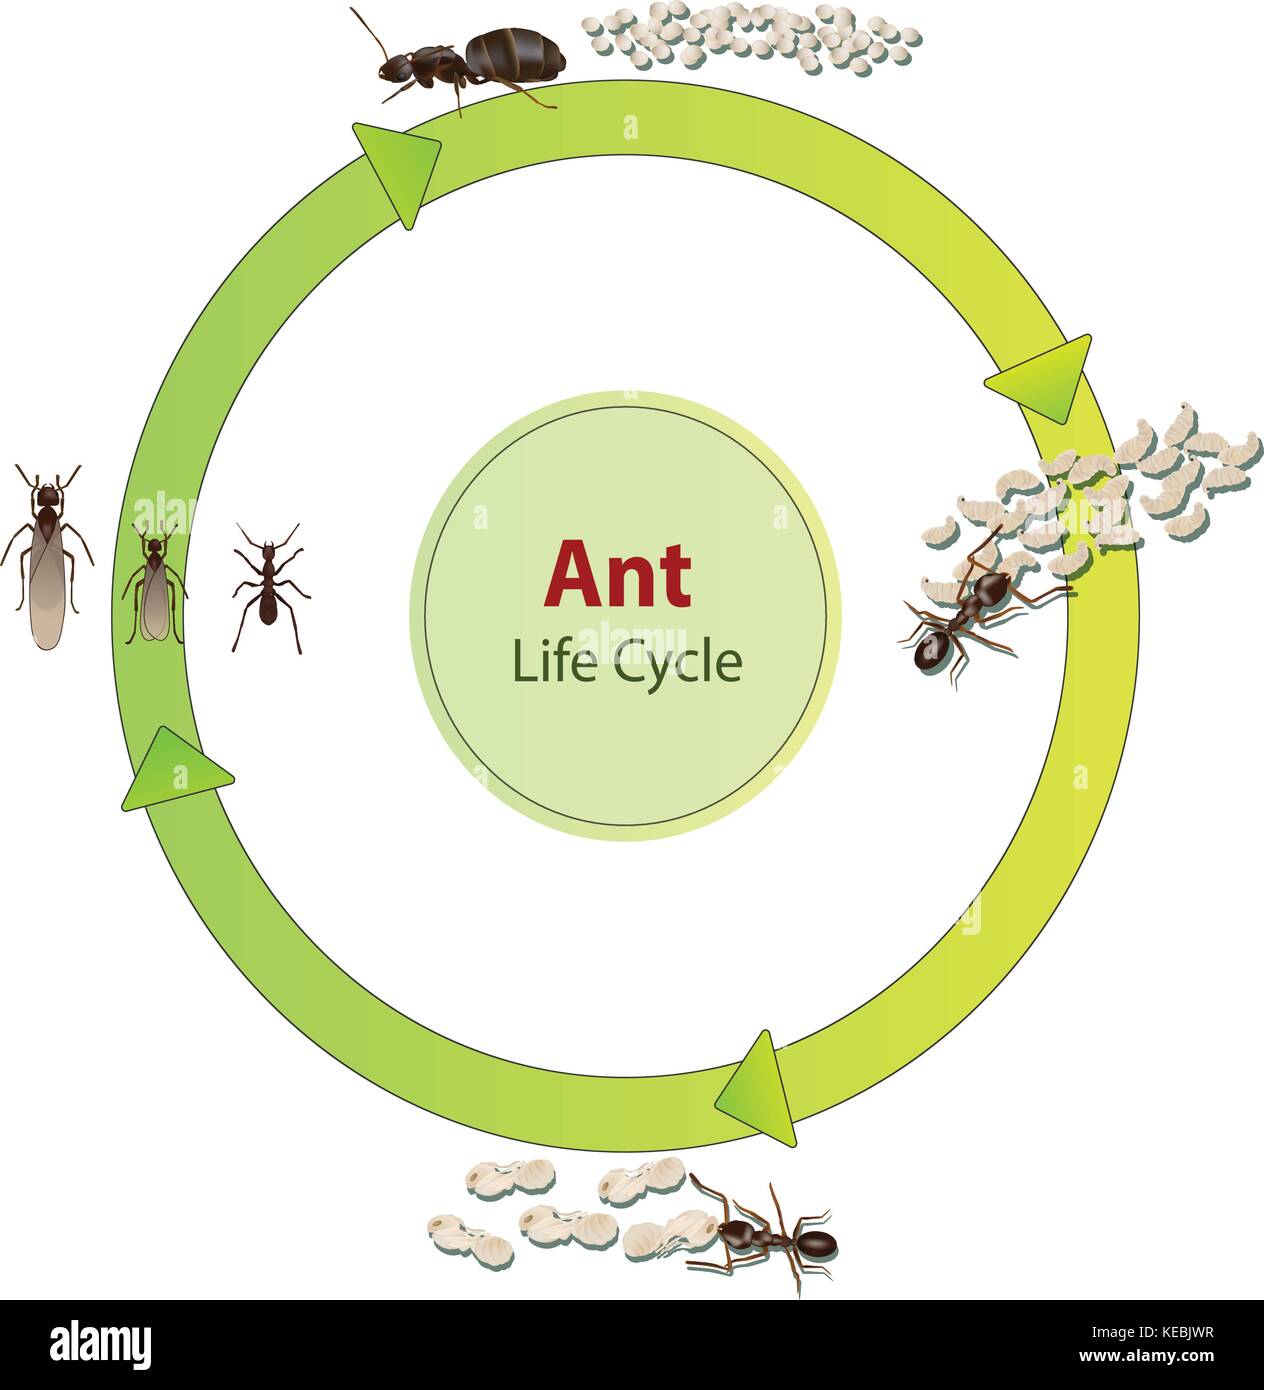 Real ant insect illustration life cycle Stock Vector